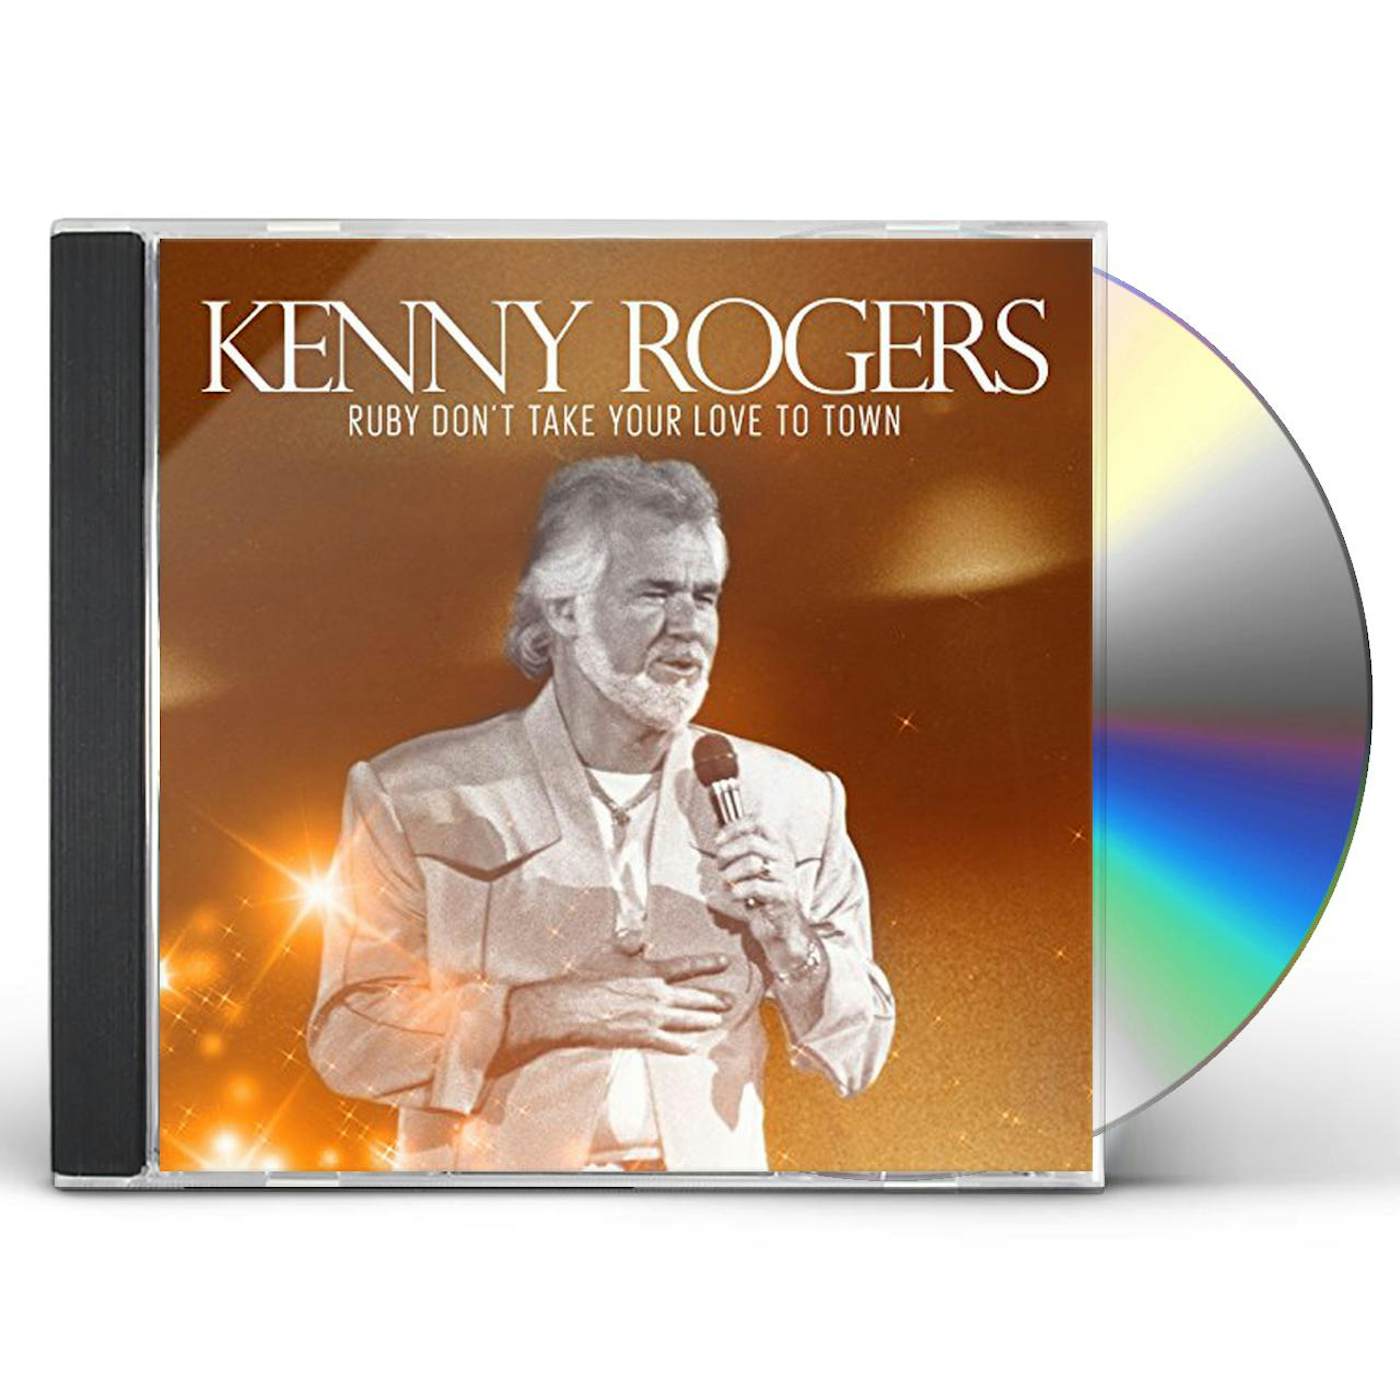 Kenny Rogers RUBY DON'T TAKE YOUR LOVE TO TOWN CD